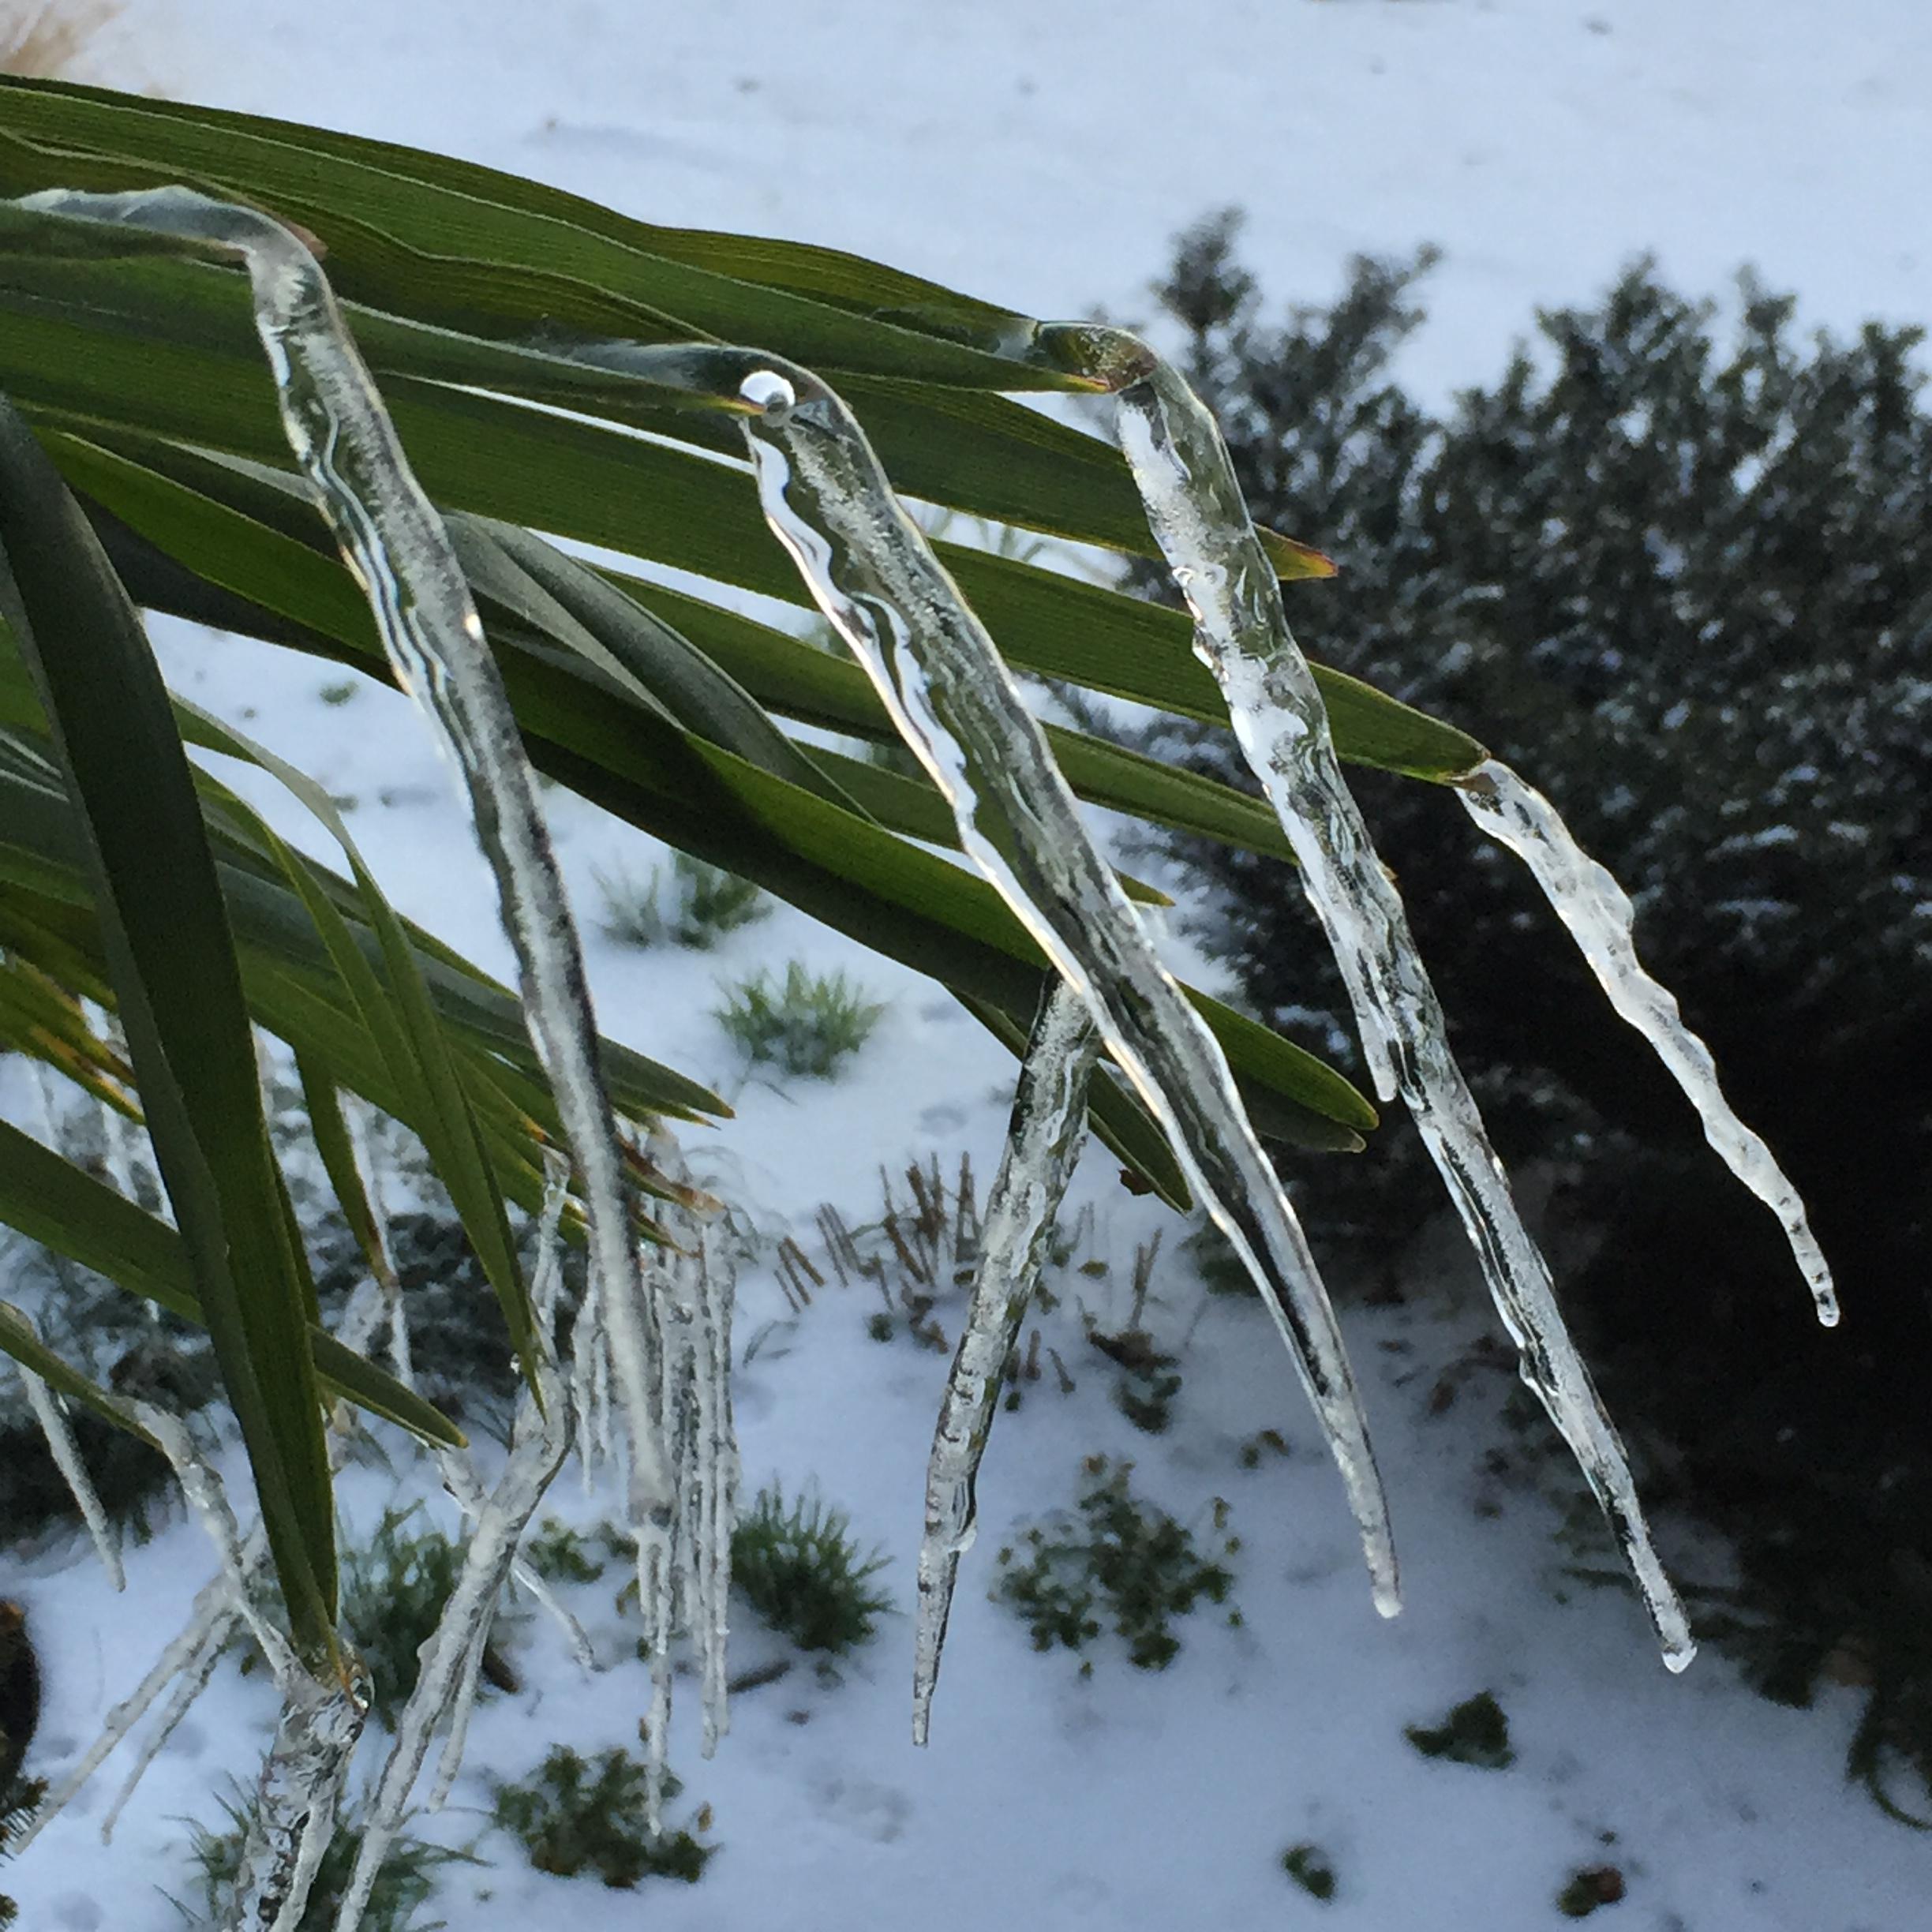 winter icicles on palmettos with snow on ground